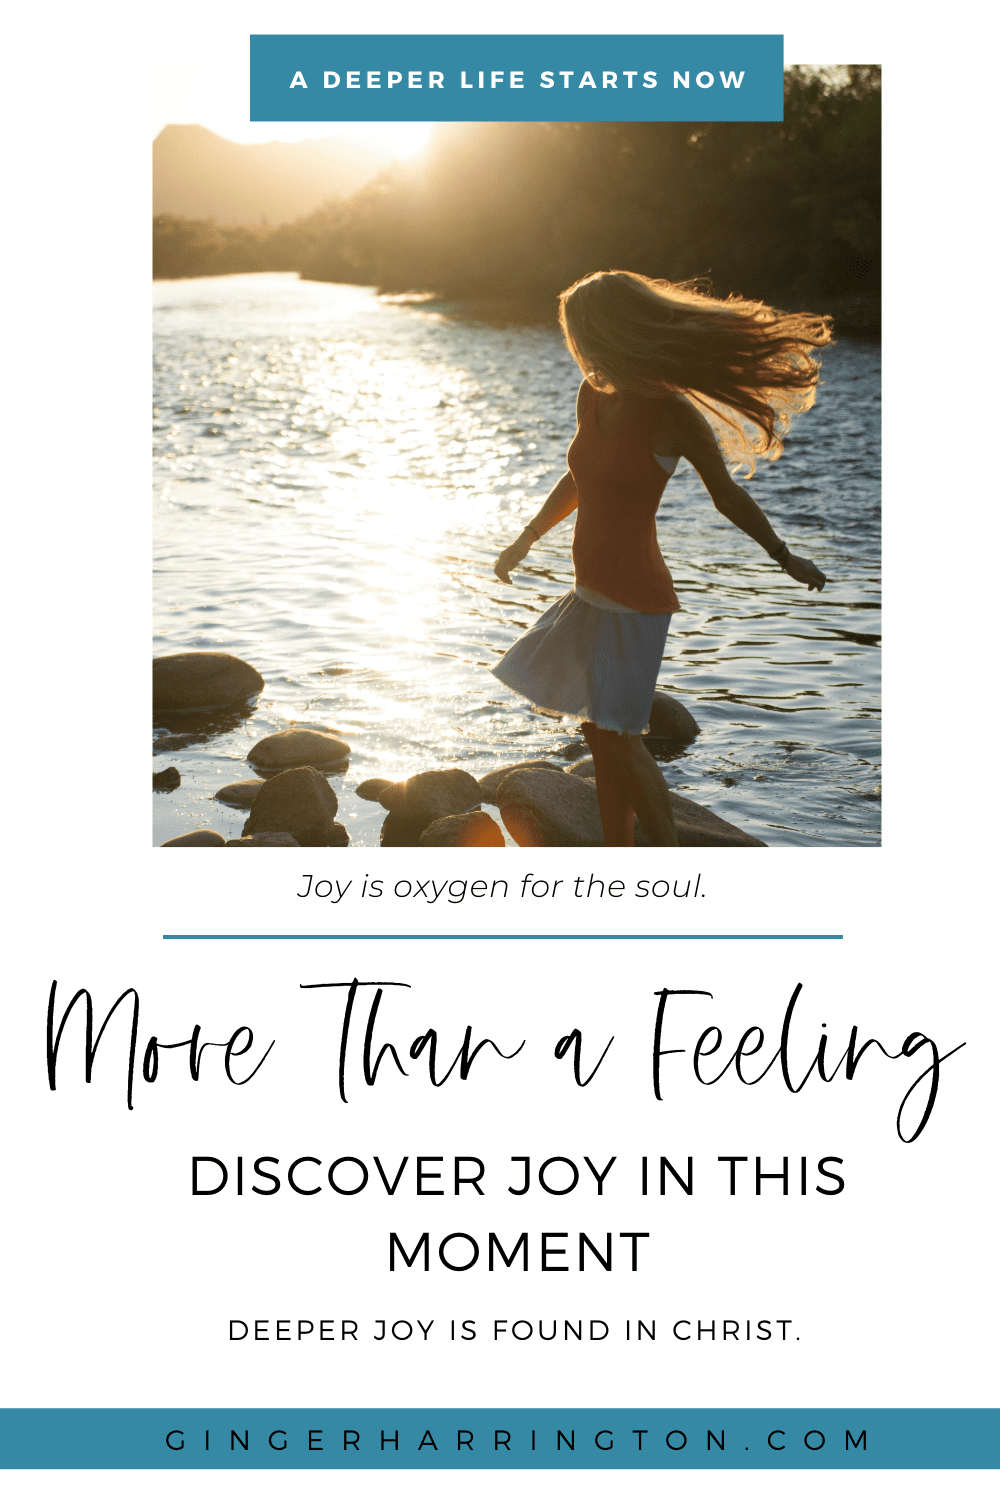 Girl skipping at the water's edge demonstrates blog post on joy and joyful moments.